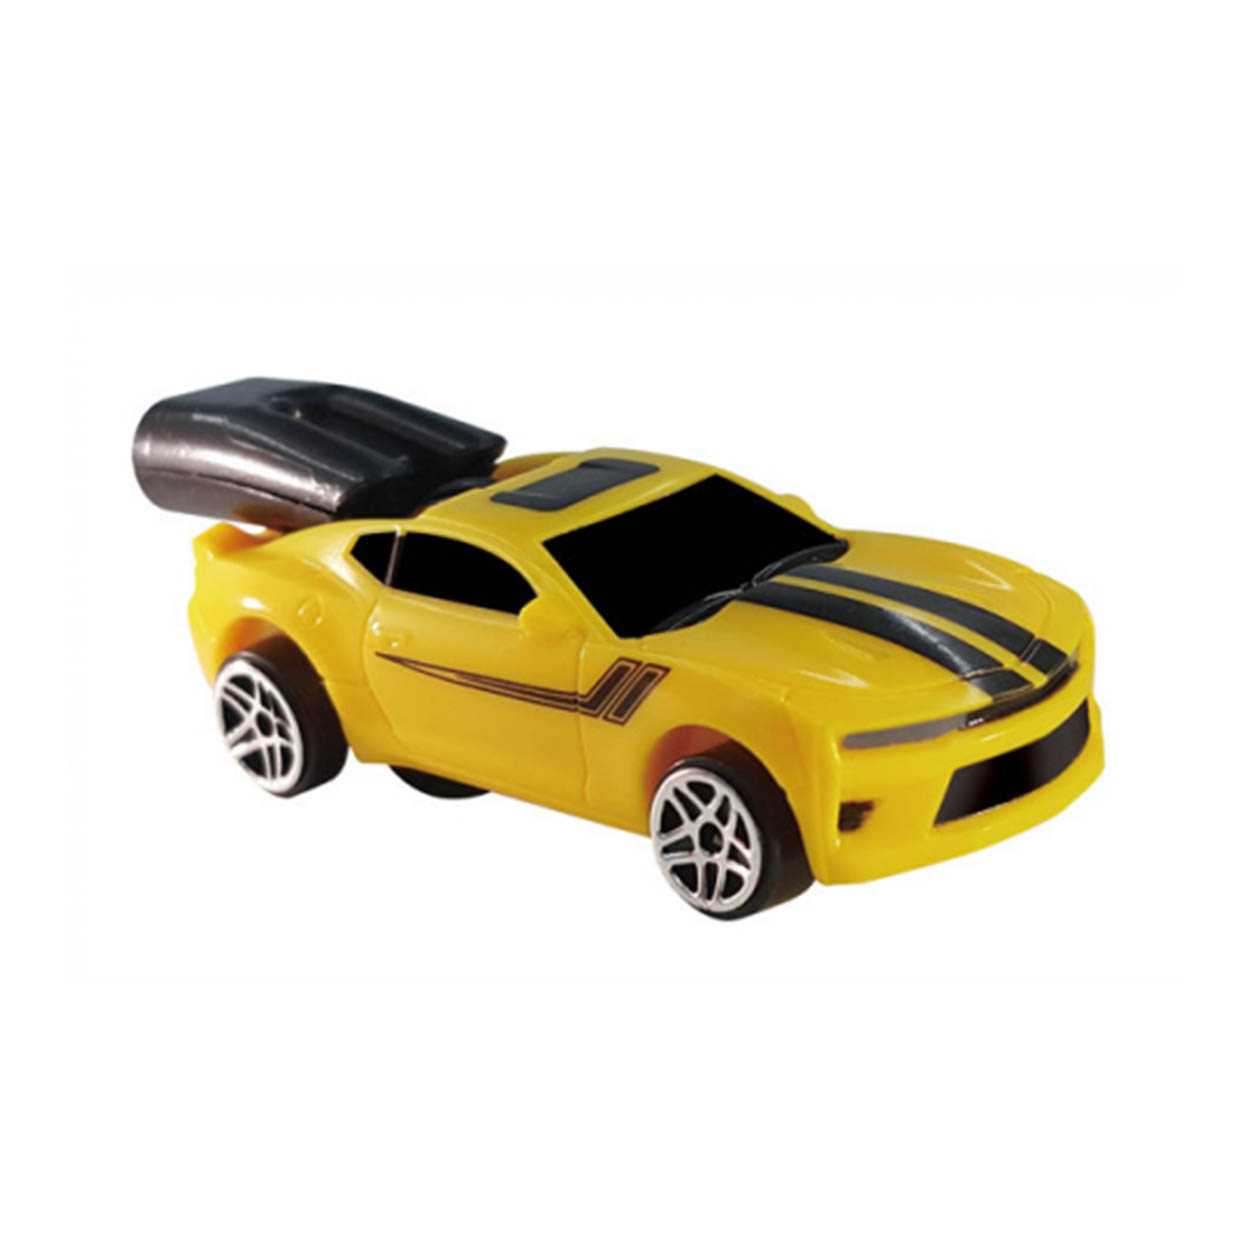 Whistle Racer Super Shadow Green Toy Car With Launcher Series 2 Ultra Edition 